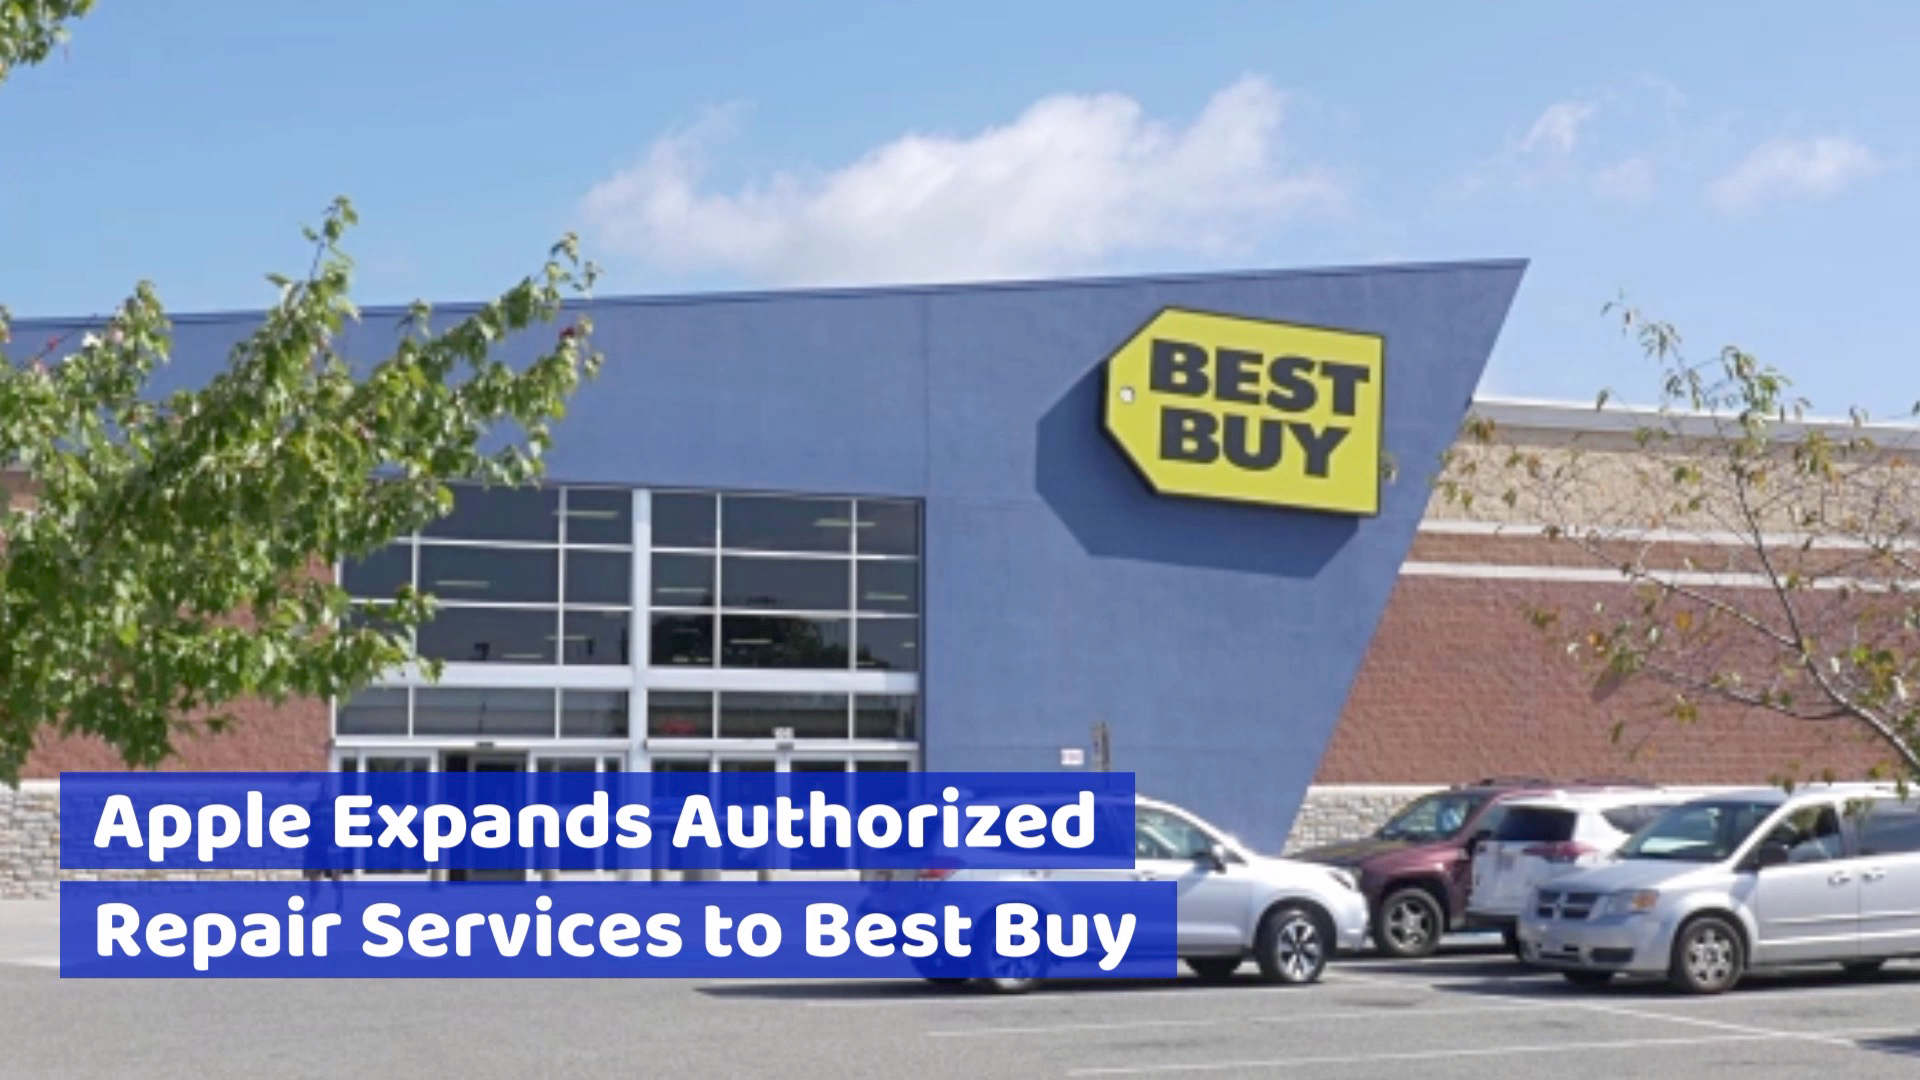 Apple Gives More Control To Best Buy